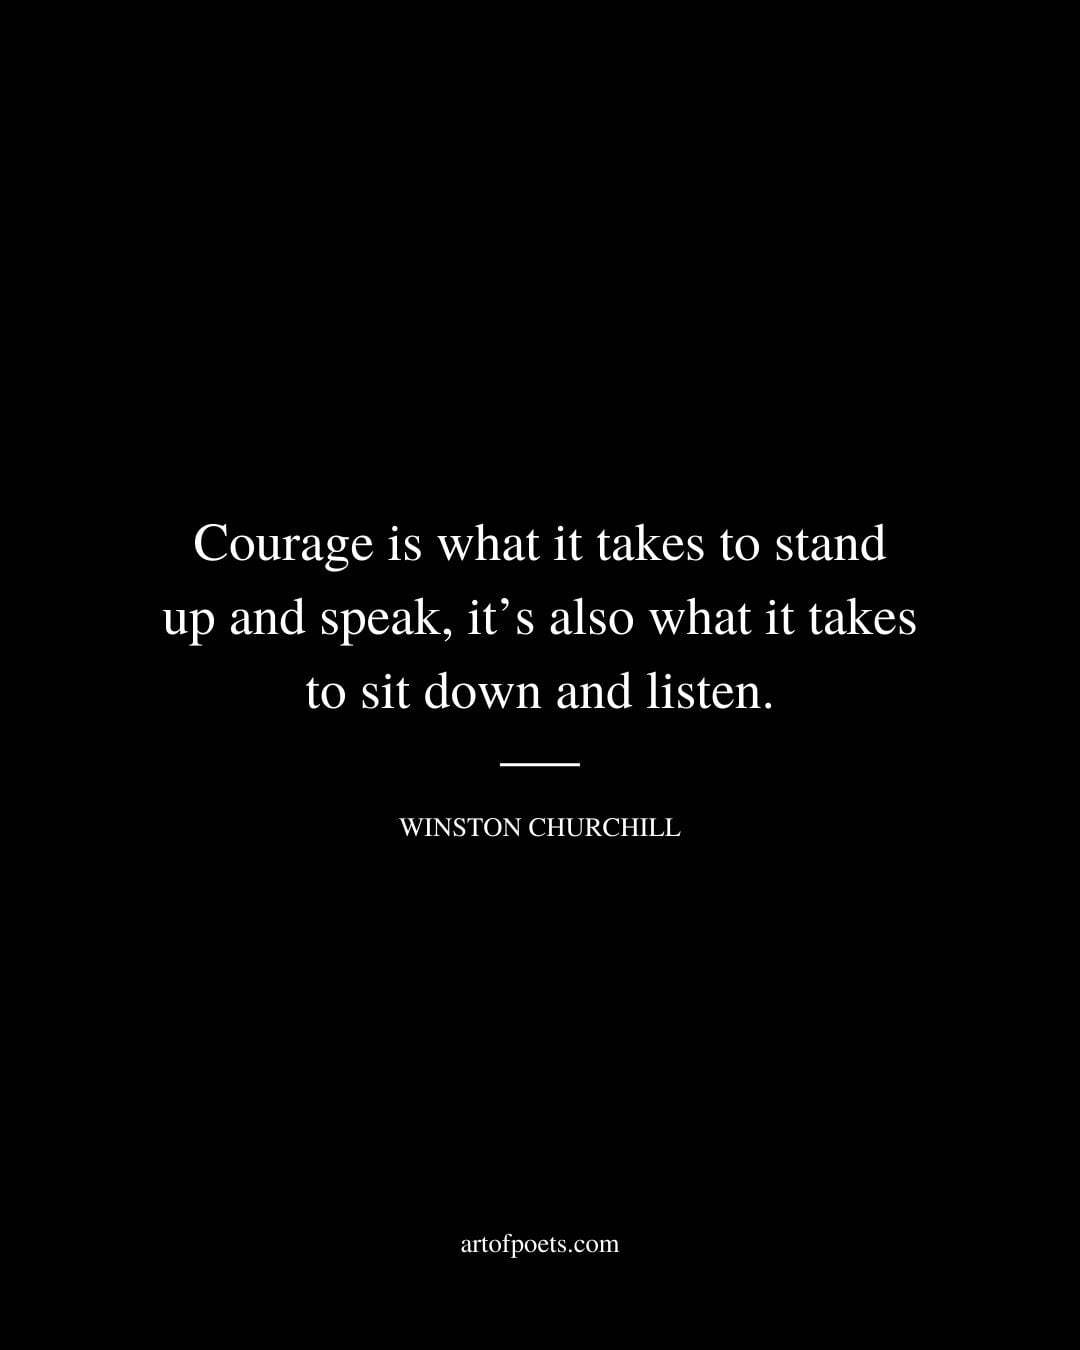 Courage is what it takes to stand up and speak its also what it takes to sit down and listen